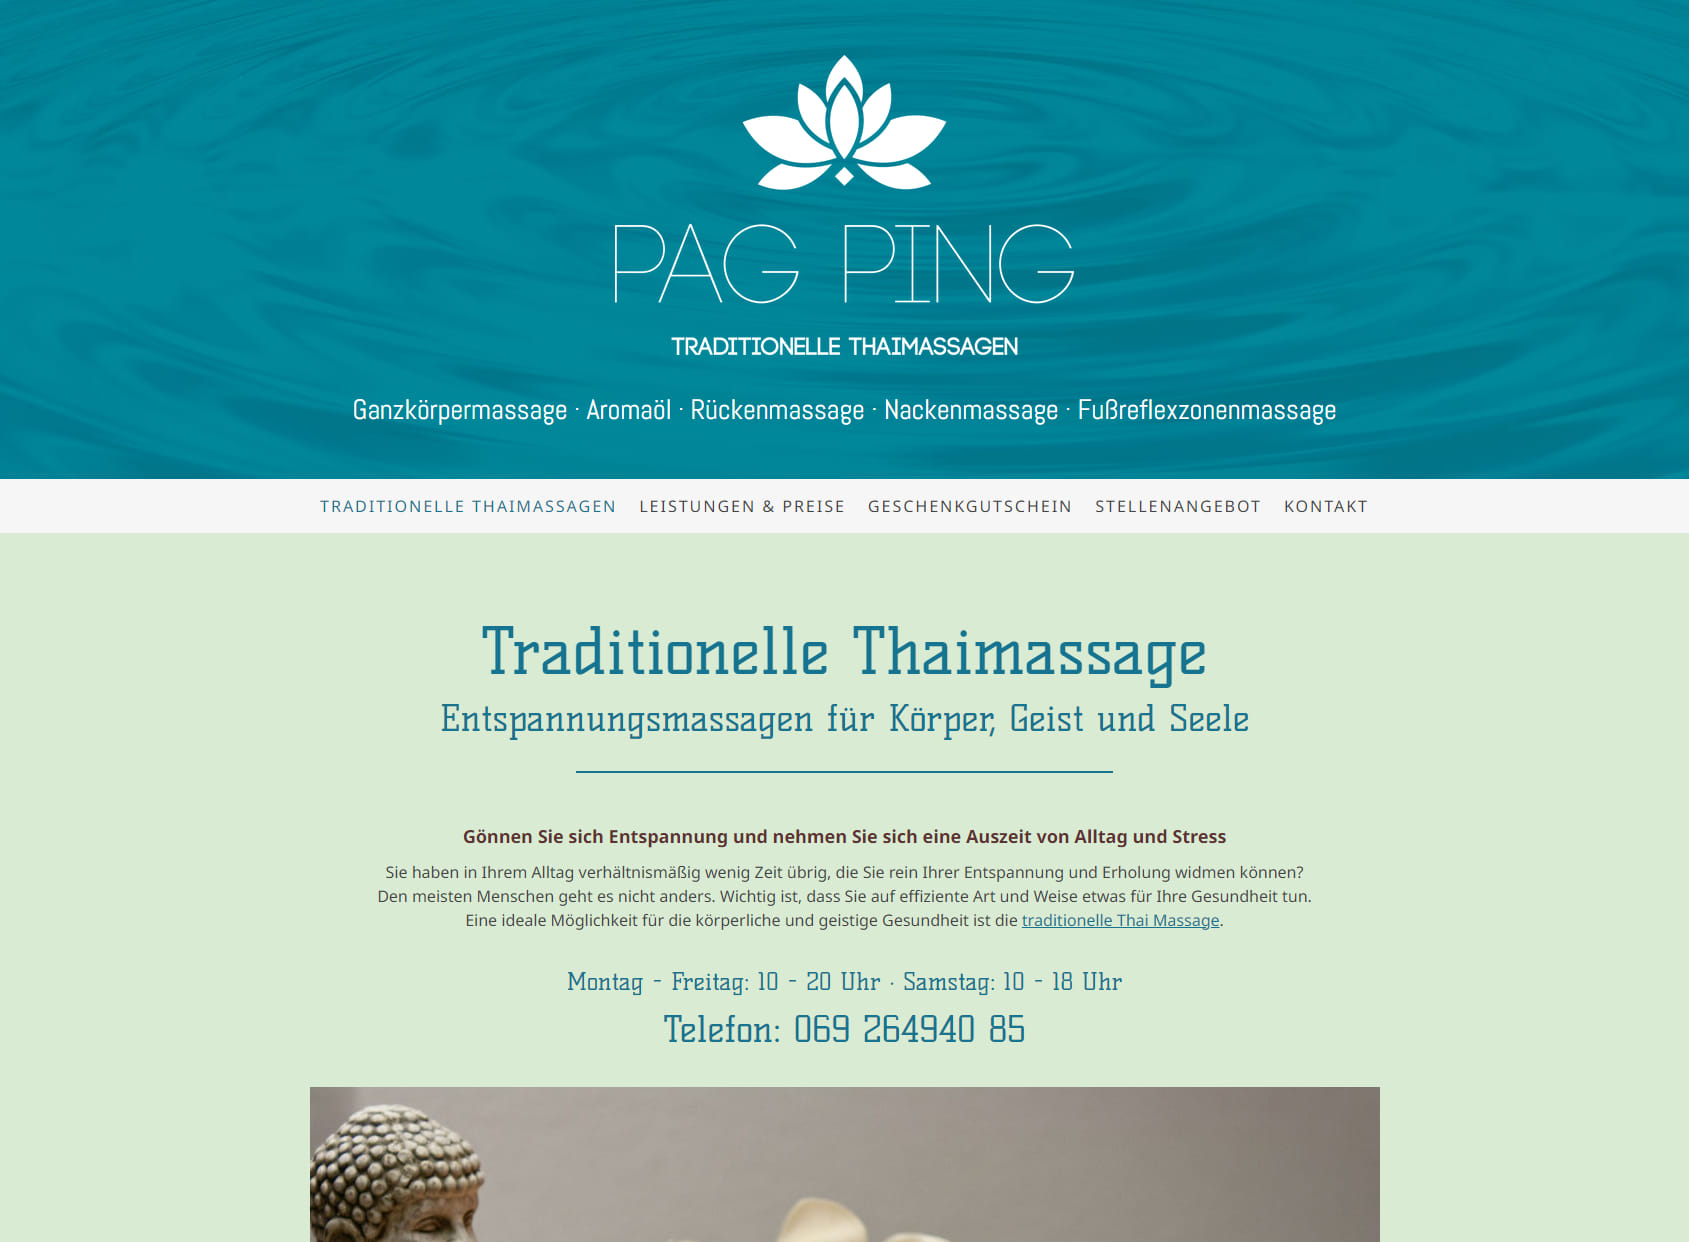 PAG PING - Traditional Thai Massage